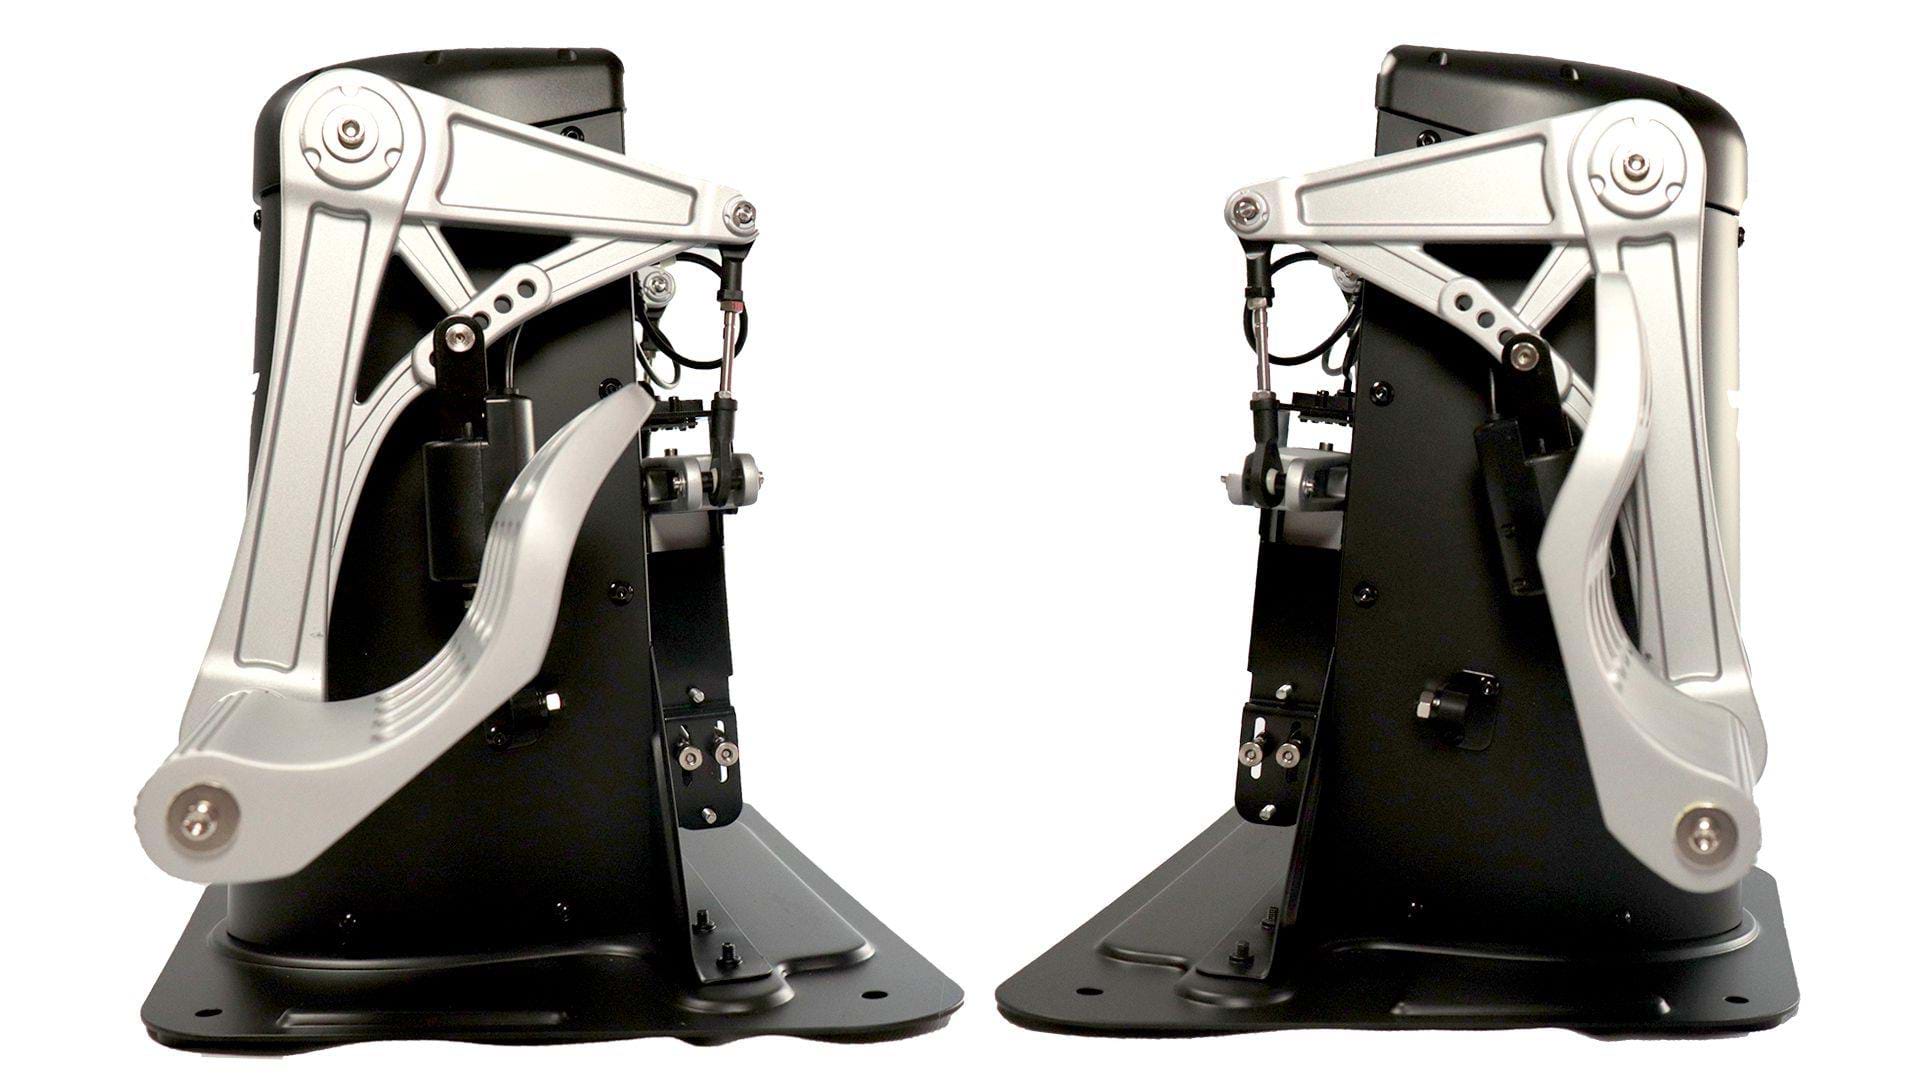 Thrustmaster TPR pedals - pedal angles